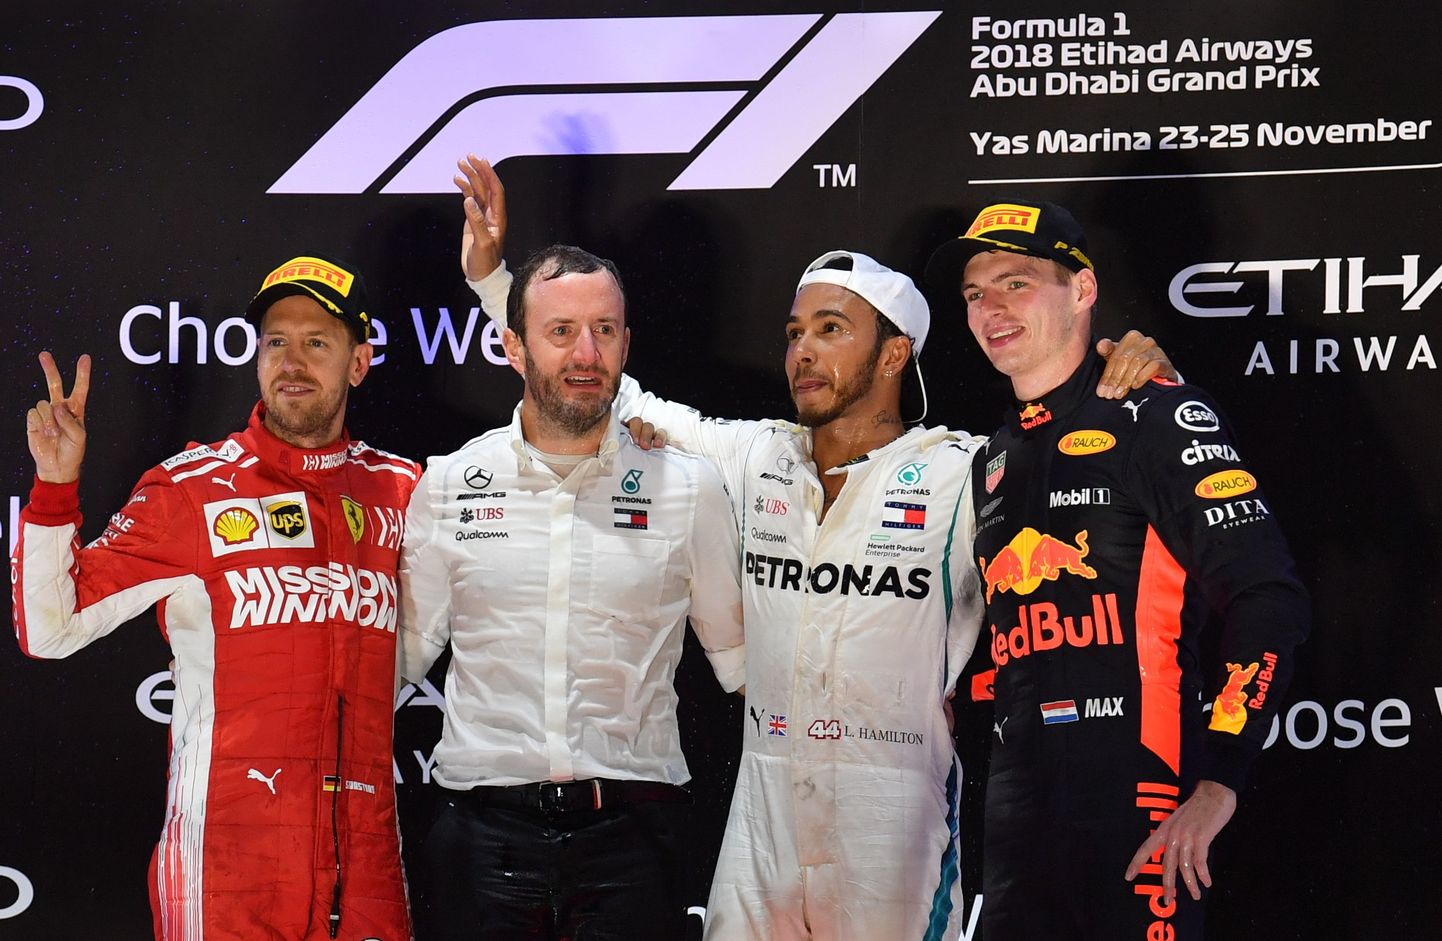 (From L) Ferrari's German driver Sebastian Vettel (2nd), head of Mercedes-Benz motorsport F1 communications Bradley Lord, Mercedes' British driver Lewis Hamilton (1st) and Red Bull's Dutch driver Max Verstappen (3rd) celebrate on the podium after the Abu Dhabi Formula One Grand Prix at the Yas Marina circuit on November 25, 2018, in Abu Dhabi. (Photo by Andrej ISAKOVIC / AFP)